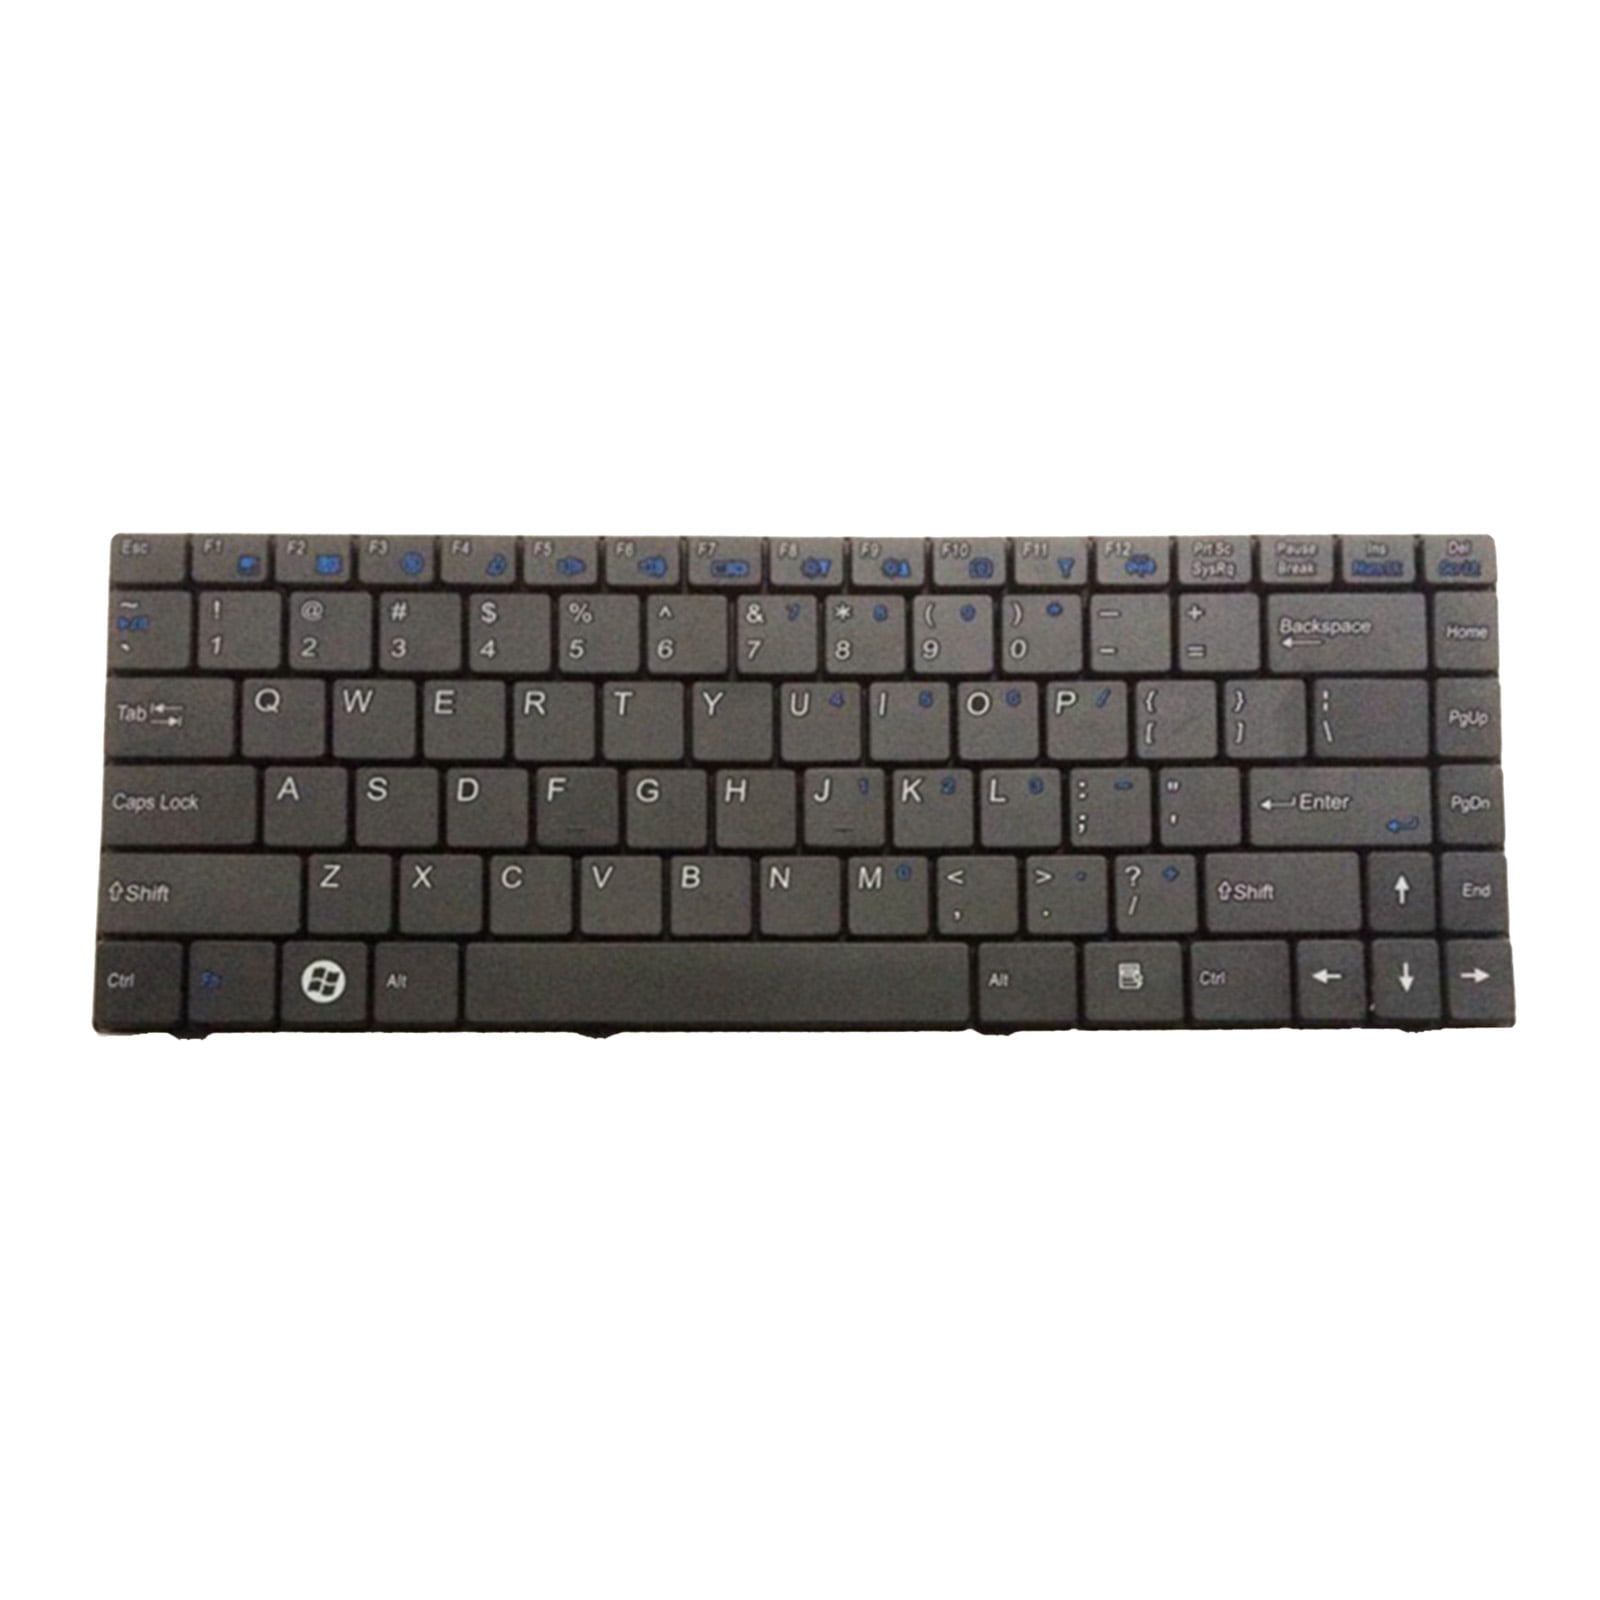 US English Keyboard for Clevo W84 W84T Series MP-07G33US-430 Laptop Replacement Keyboard